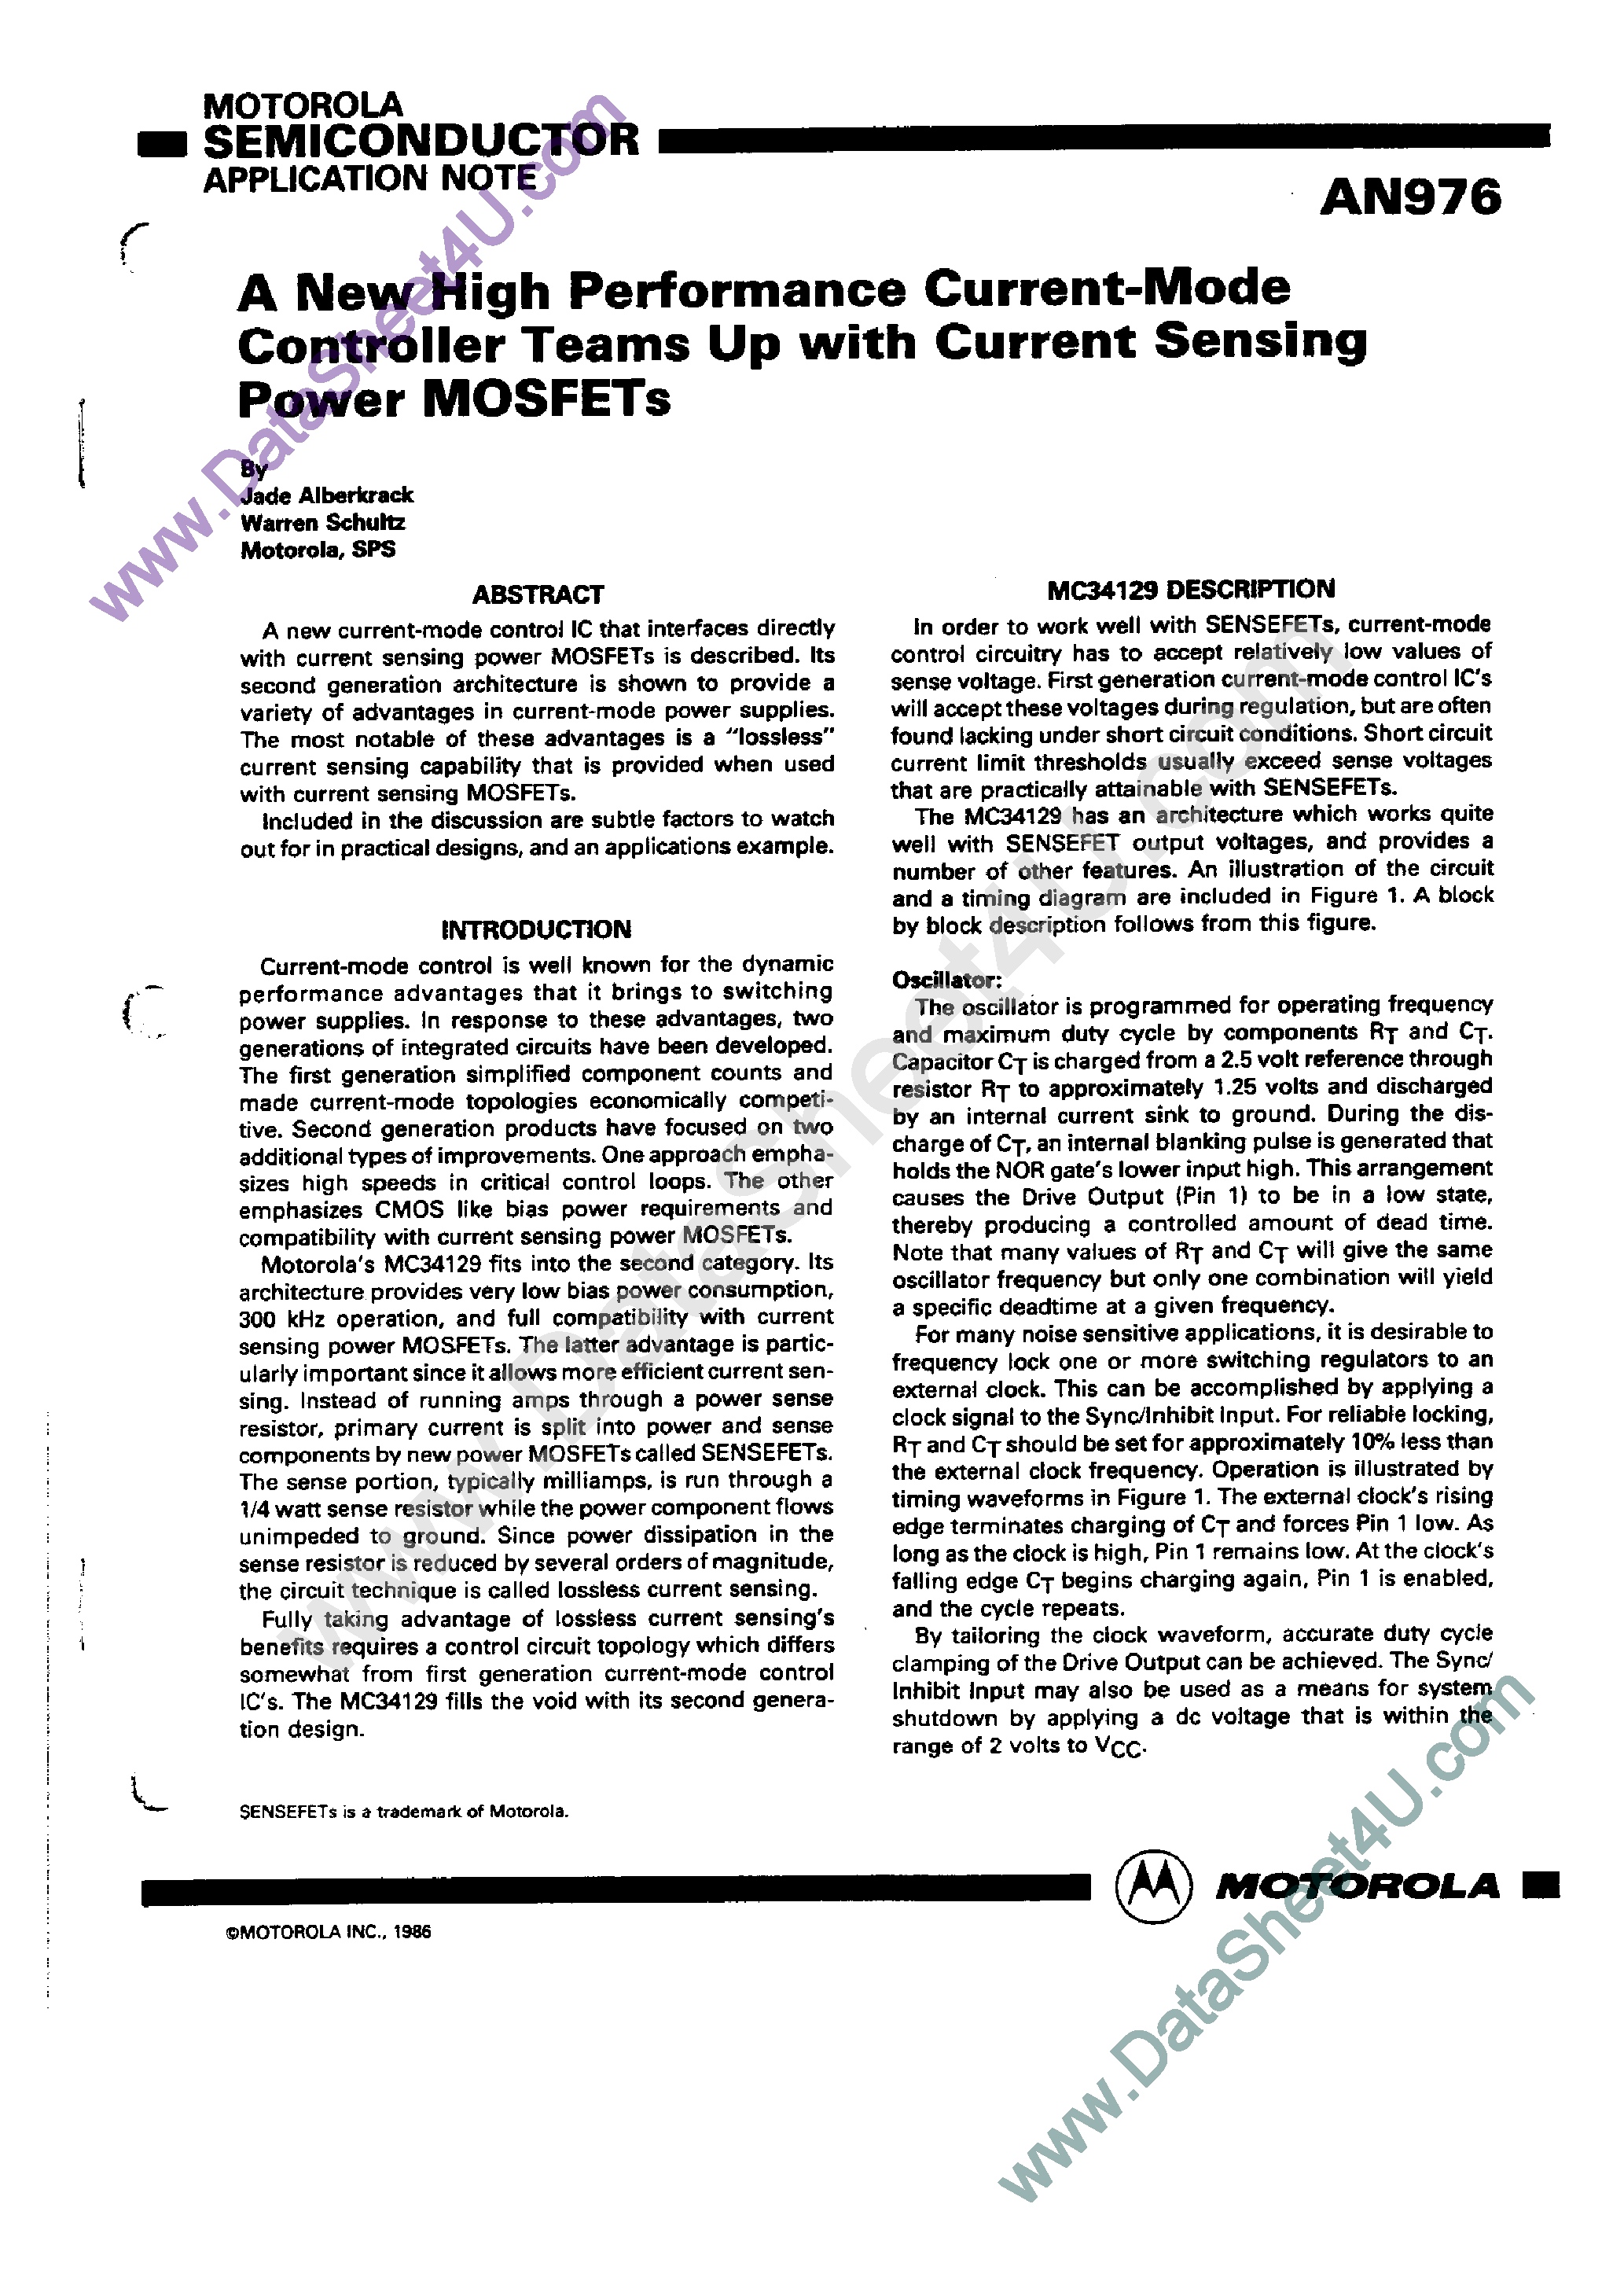 Datasheet AN976 - A New High Performance Current Mode Controller Teams Up with Current Sensing Power MOSFETs page 1